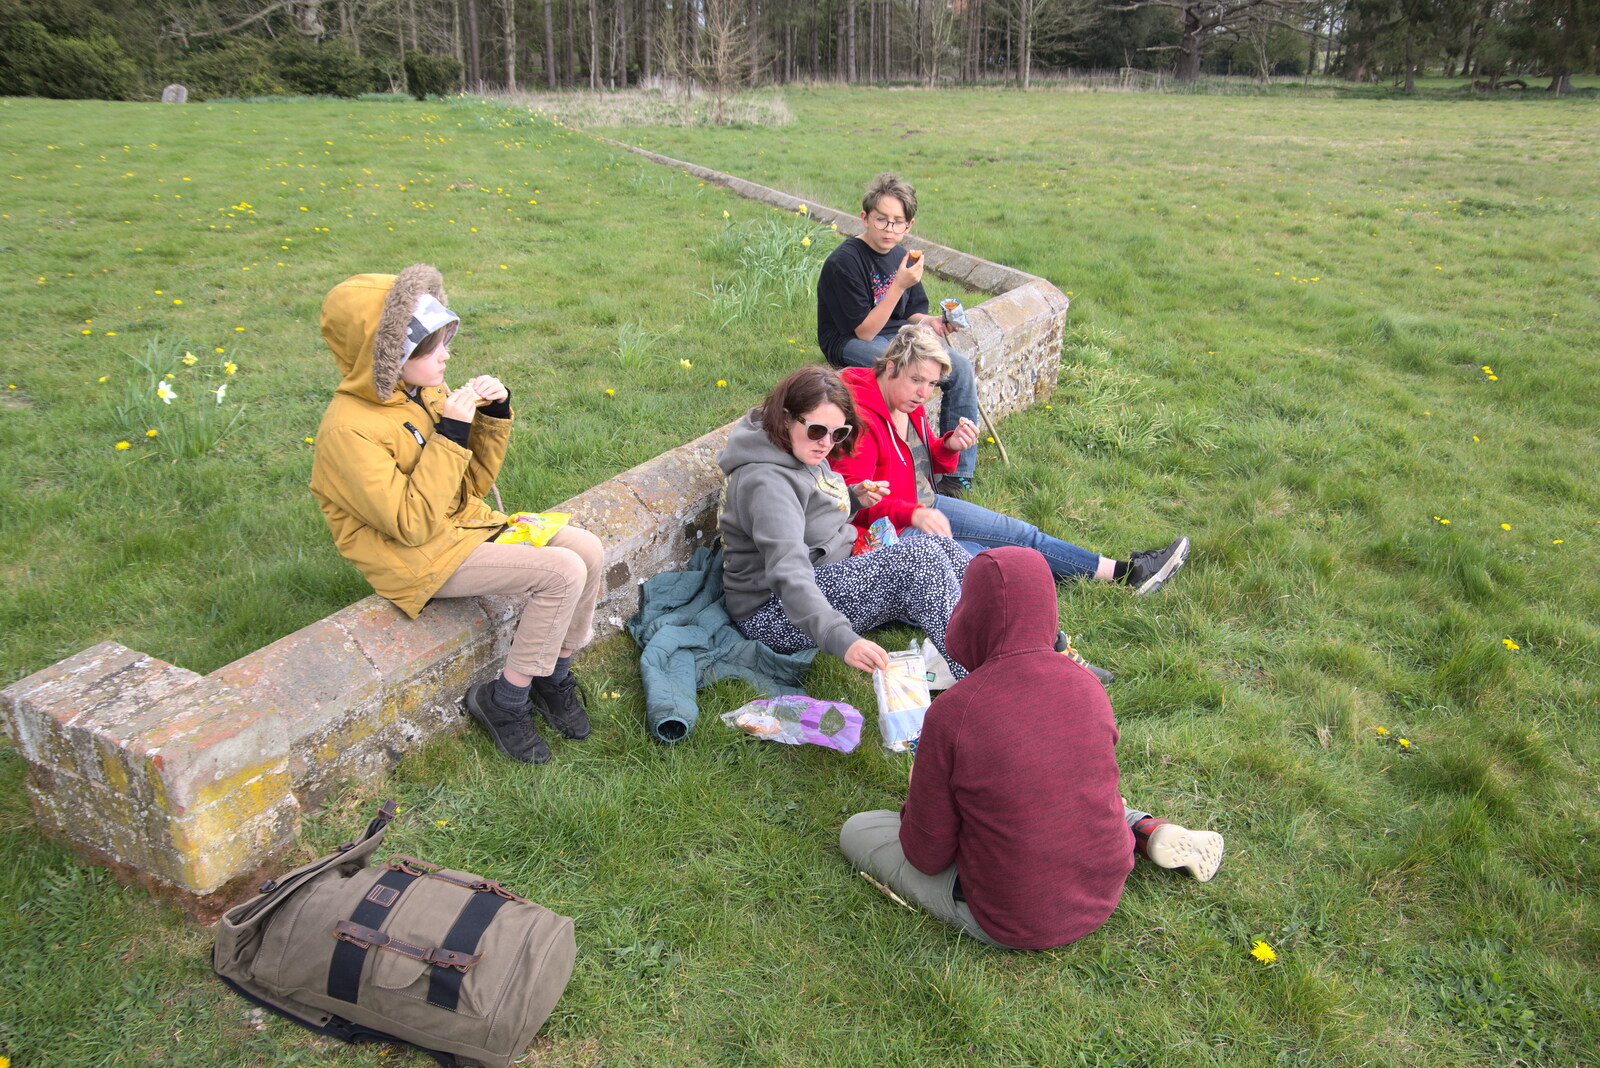 A Camper-Van Trip, West Harling, Norfolk - 13th April 2022: We eat a picnic by the church